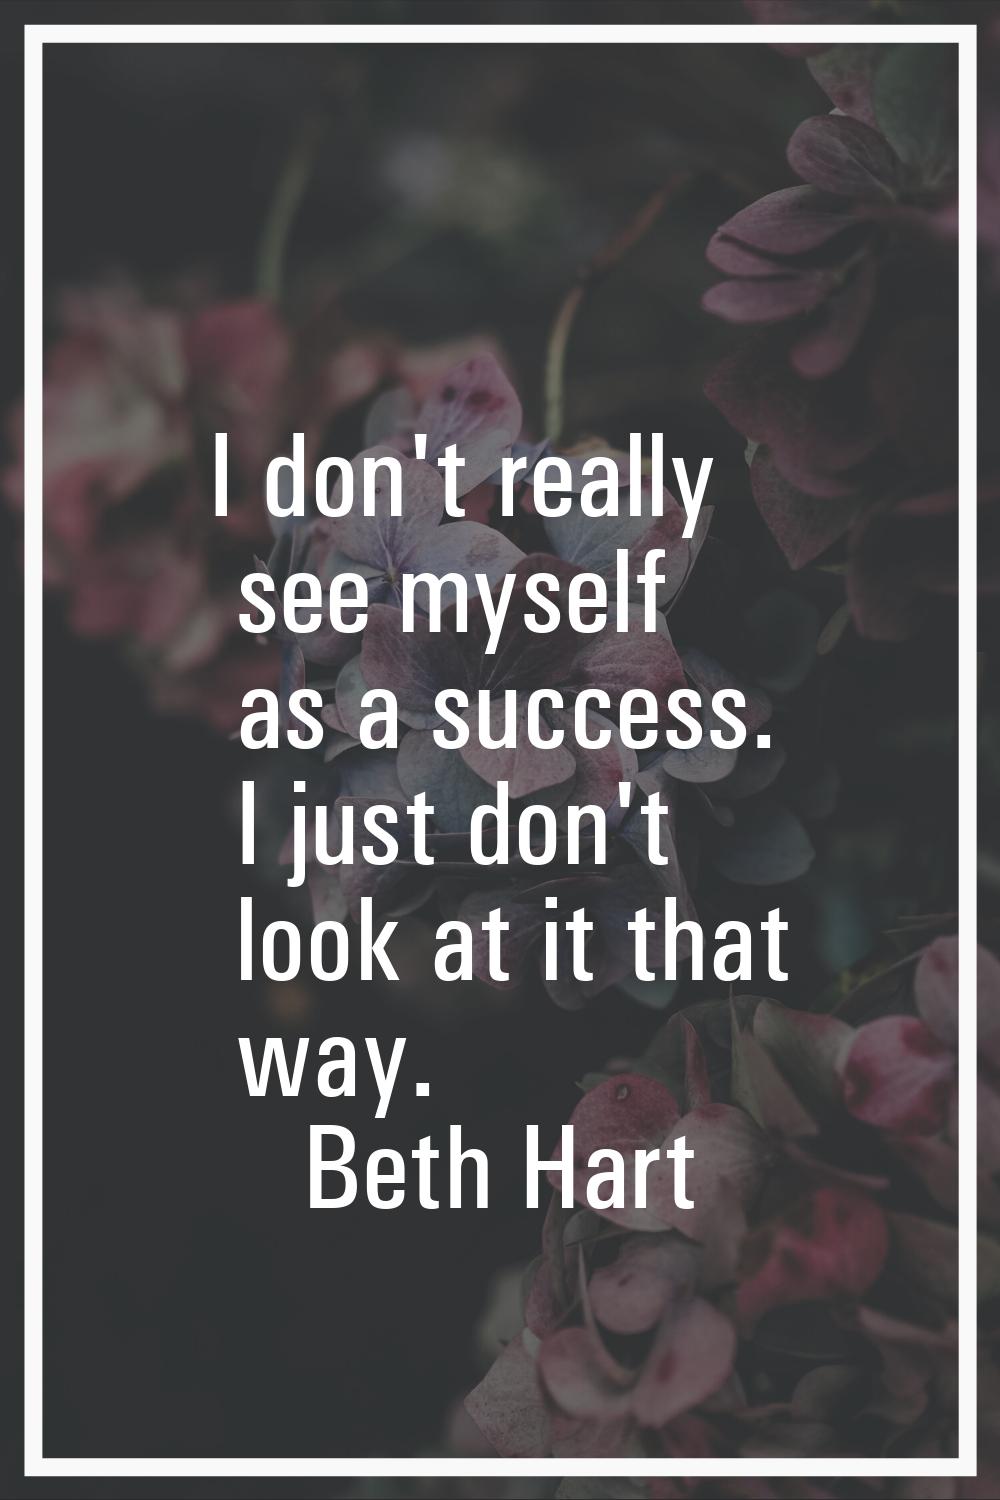 I don't really see myself as a success. I just don't look at it that way.